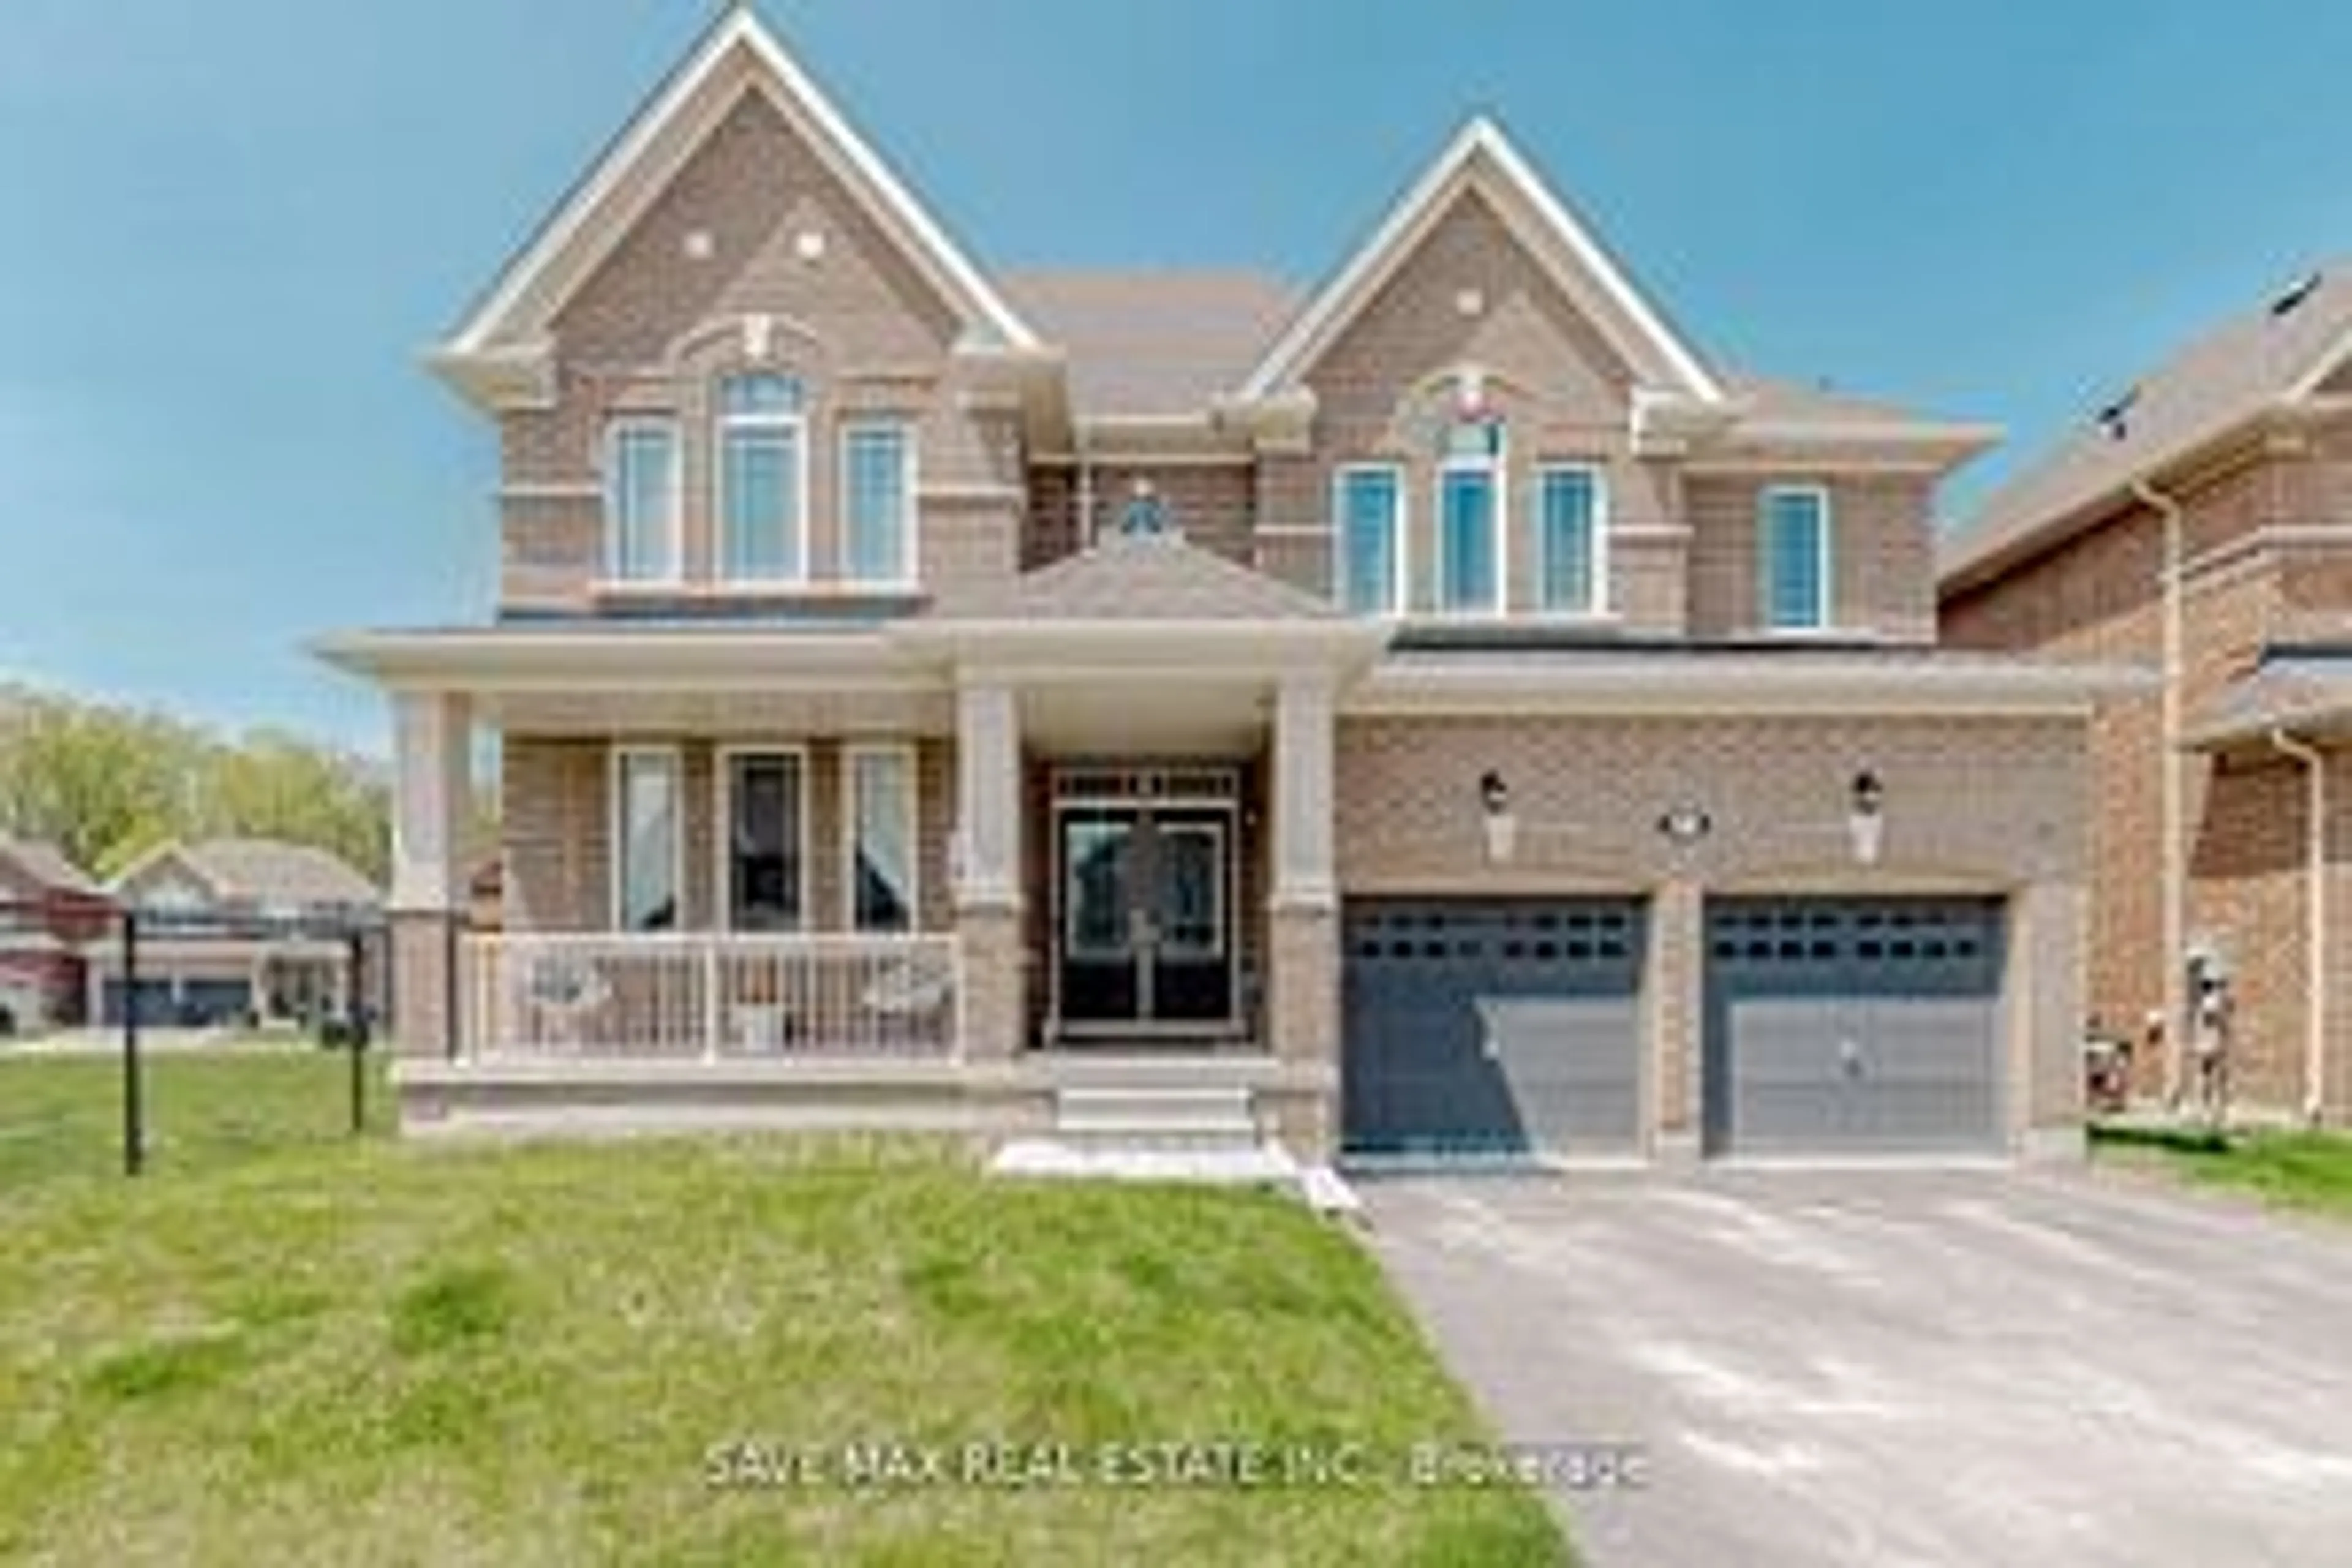 Home with brick exterior material for 811 Green St, Innisfil Ontario L0L 1W0